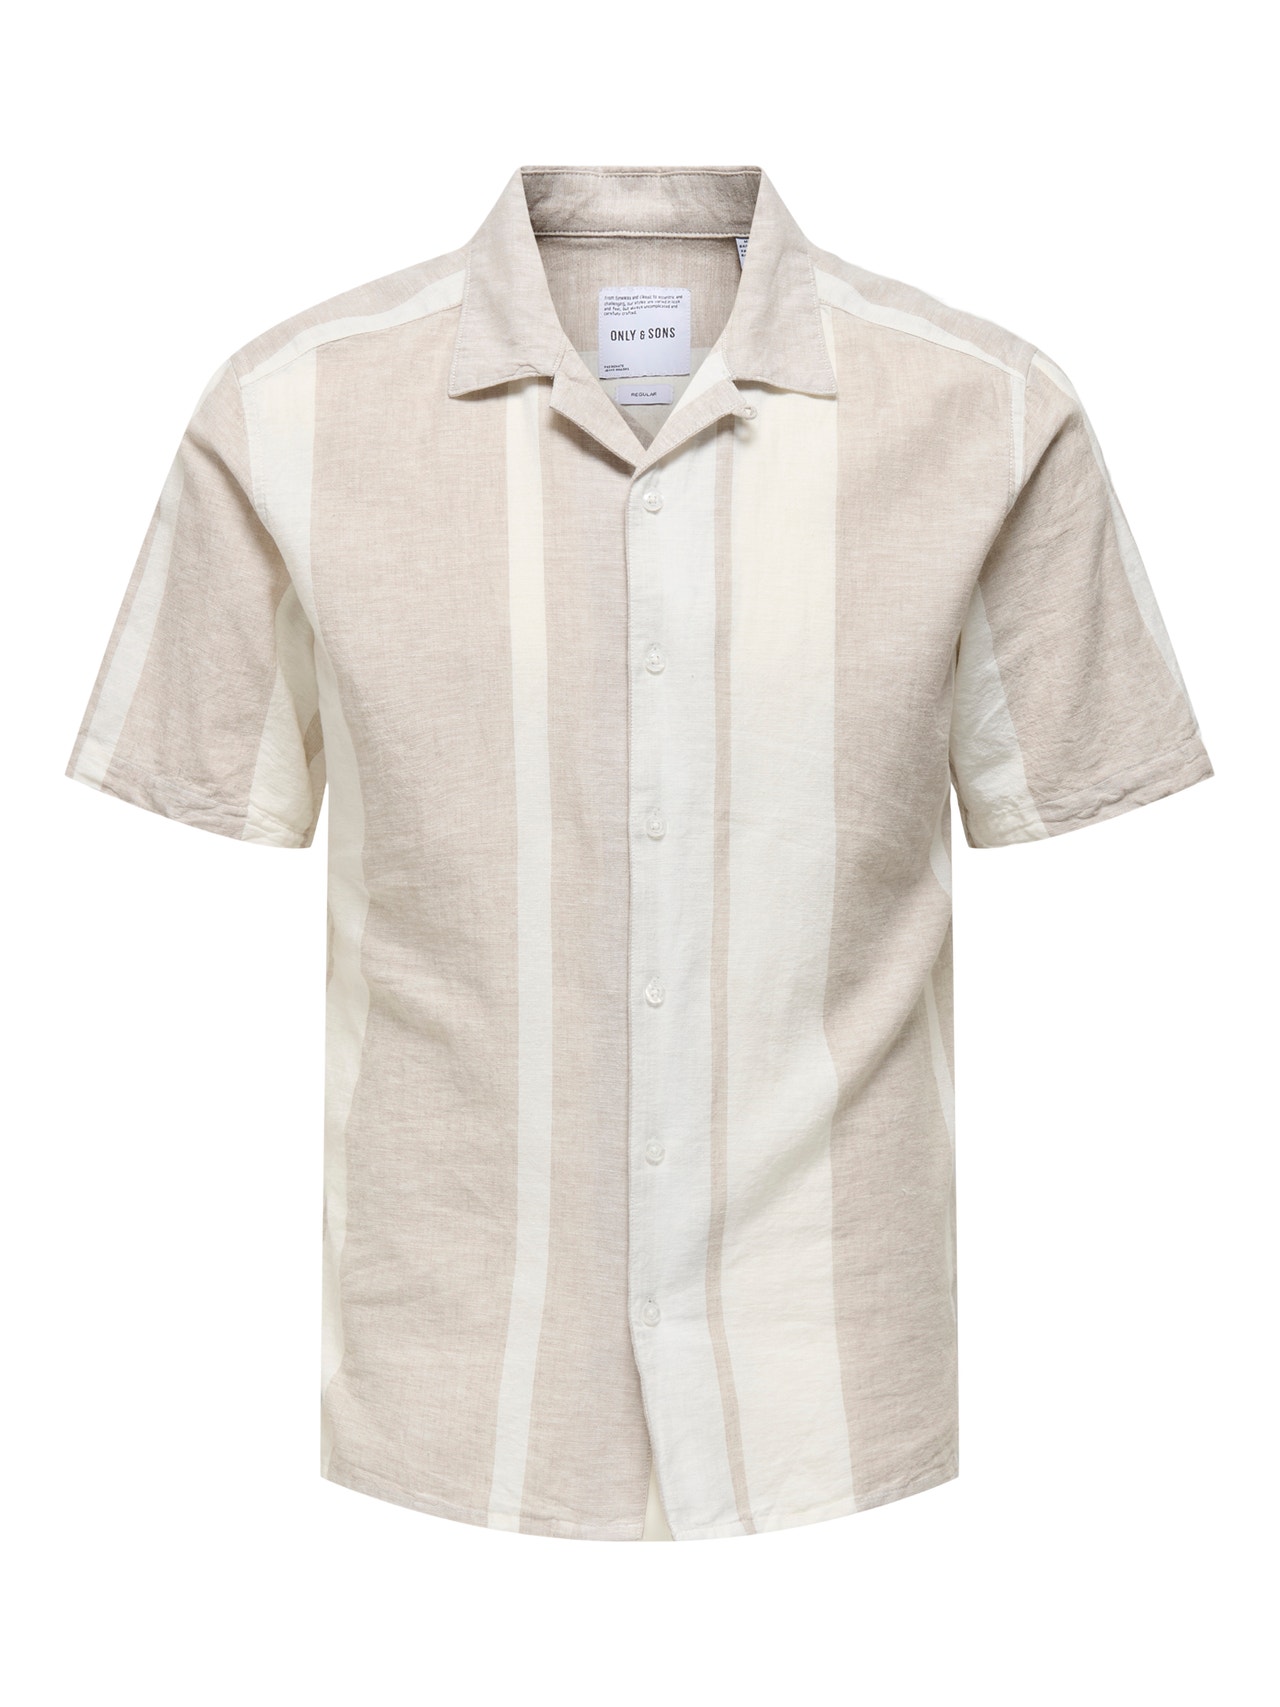 ONLY & SONS Shirt with short sleeves -Vintage Khaki - 22026109